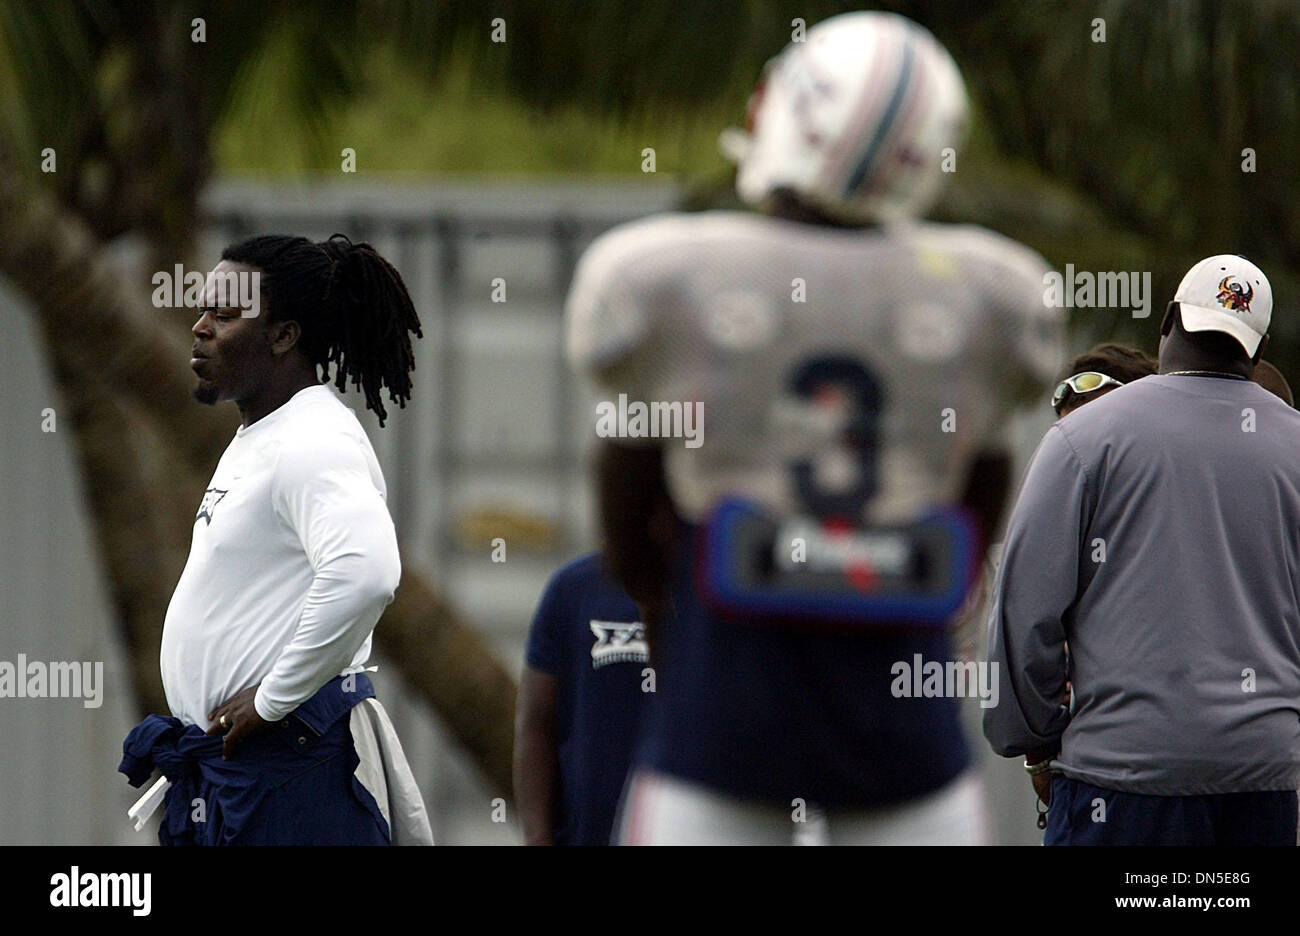 Sep 04, 2006; Boca Raton, FL, USA; Former NY Jet JOHNNY FROST now leads the defensive ends for the Florida Atlantic University Owls.  Mandatory Credit: Photo by Chris Matula/Palm Beach Post/ZUMA Press. (©) Copyright 2006 by Palm Beach Post Stock Photo